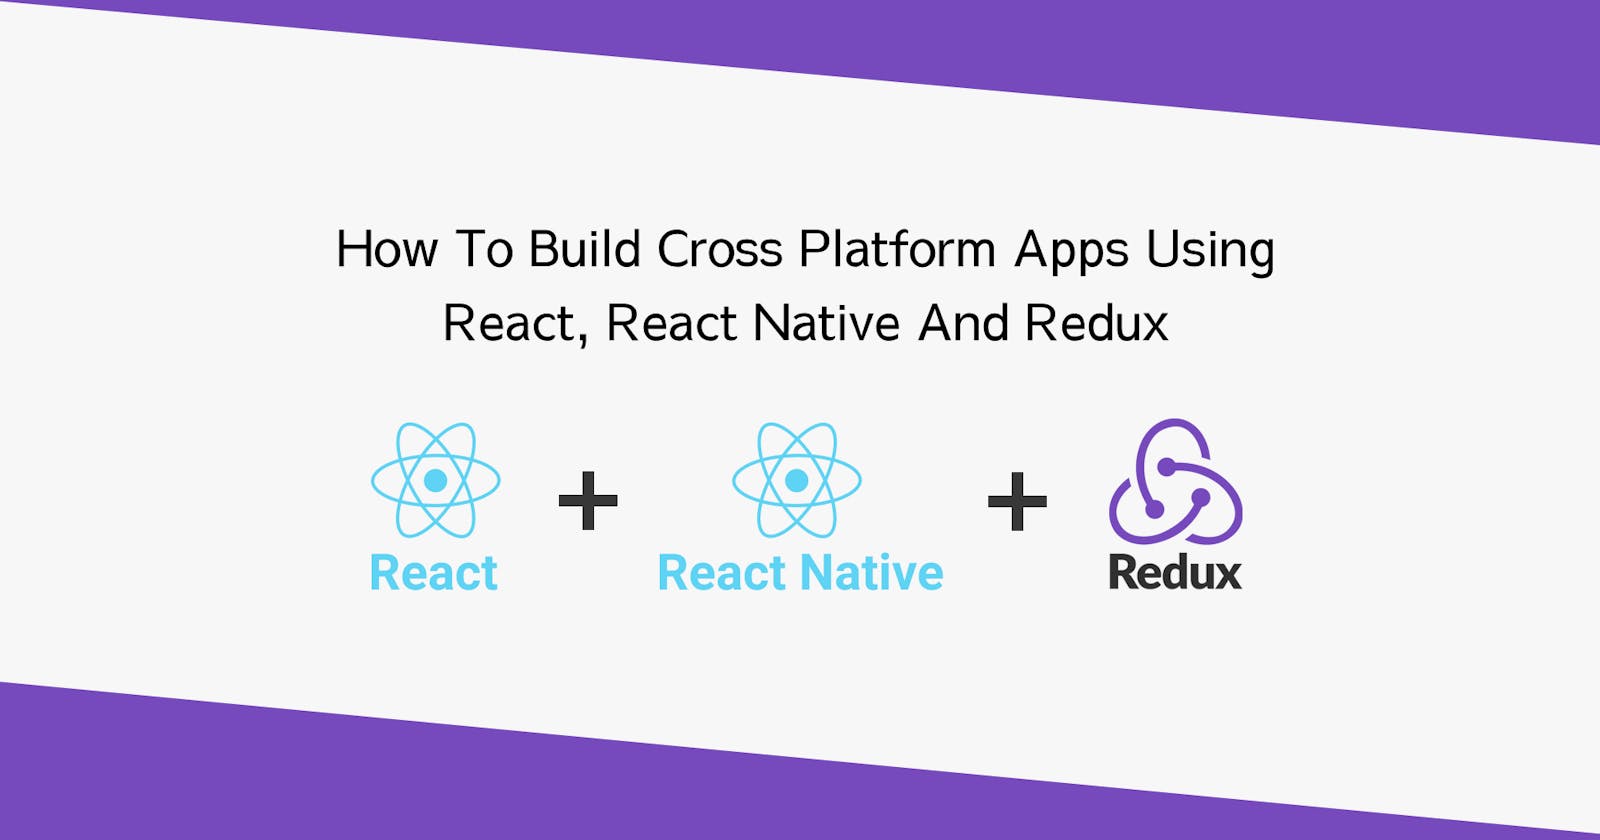 How To Build Cross Platform Apps Using React, React Native And Redux